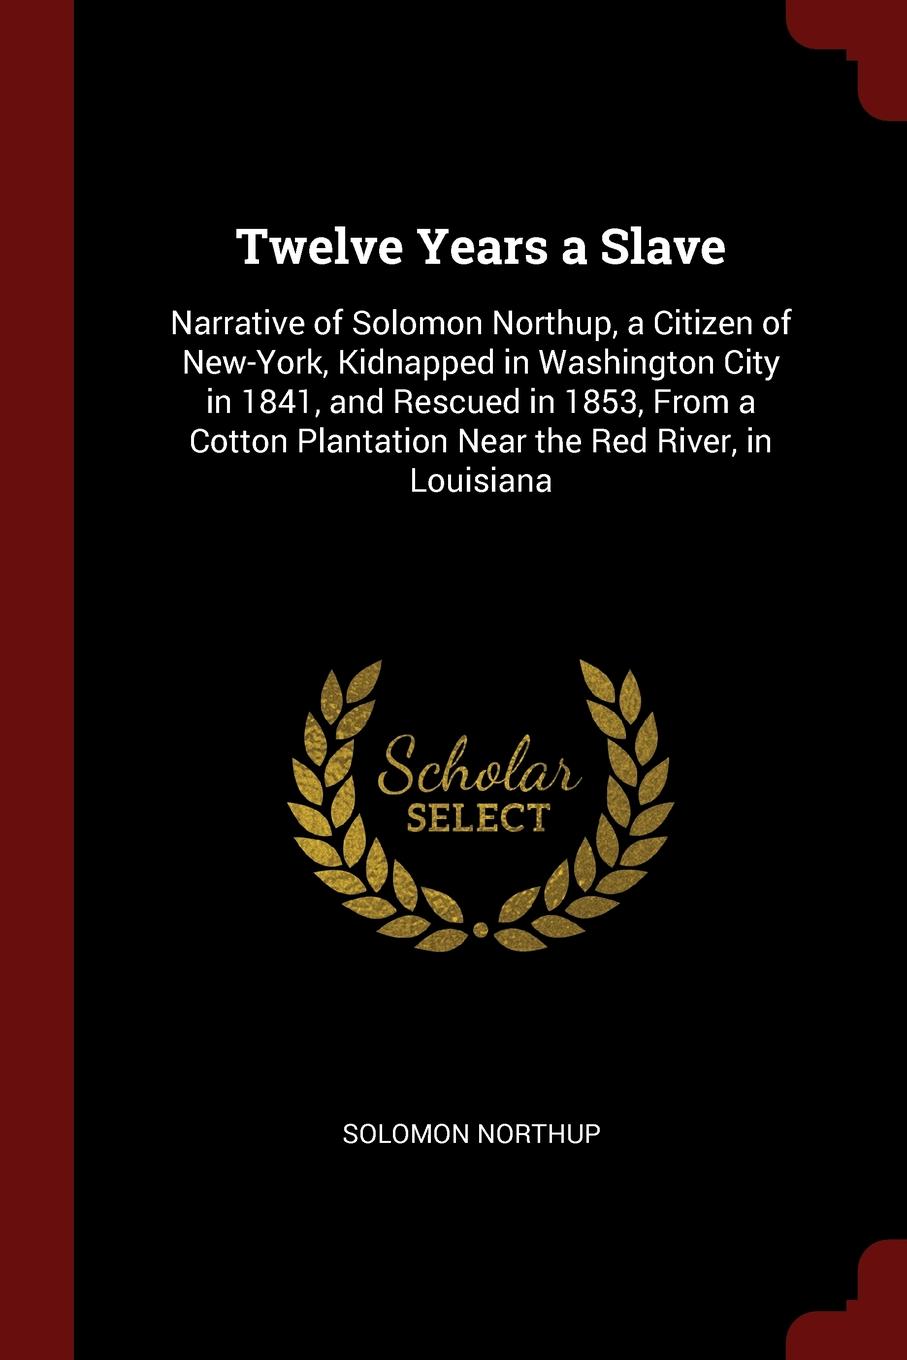 фото Twelve Years a Slave. Narrative of Solomon Northup, a Citizen of New-York, Kidnapped in Washington City in 1841, and Rescued in 1853, From a Cotton Plantation Near the Red River, in Louisiana